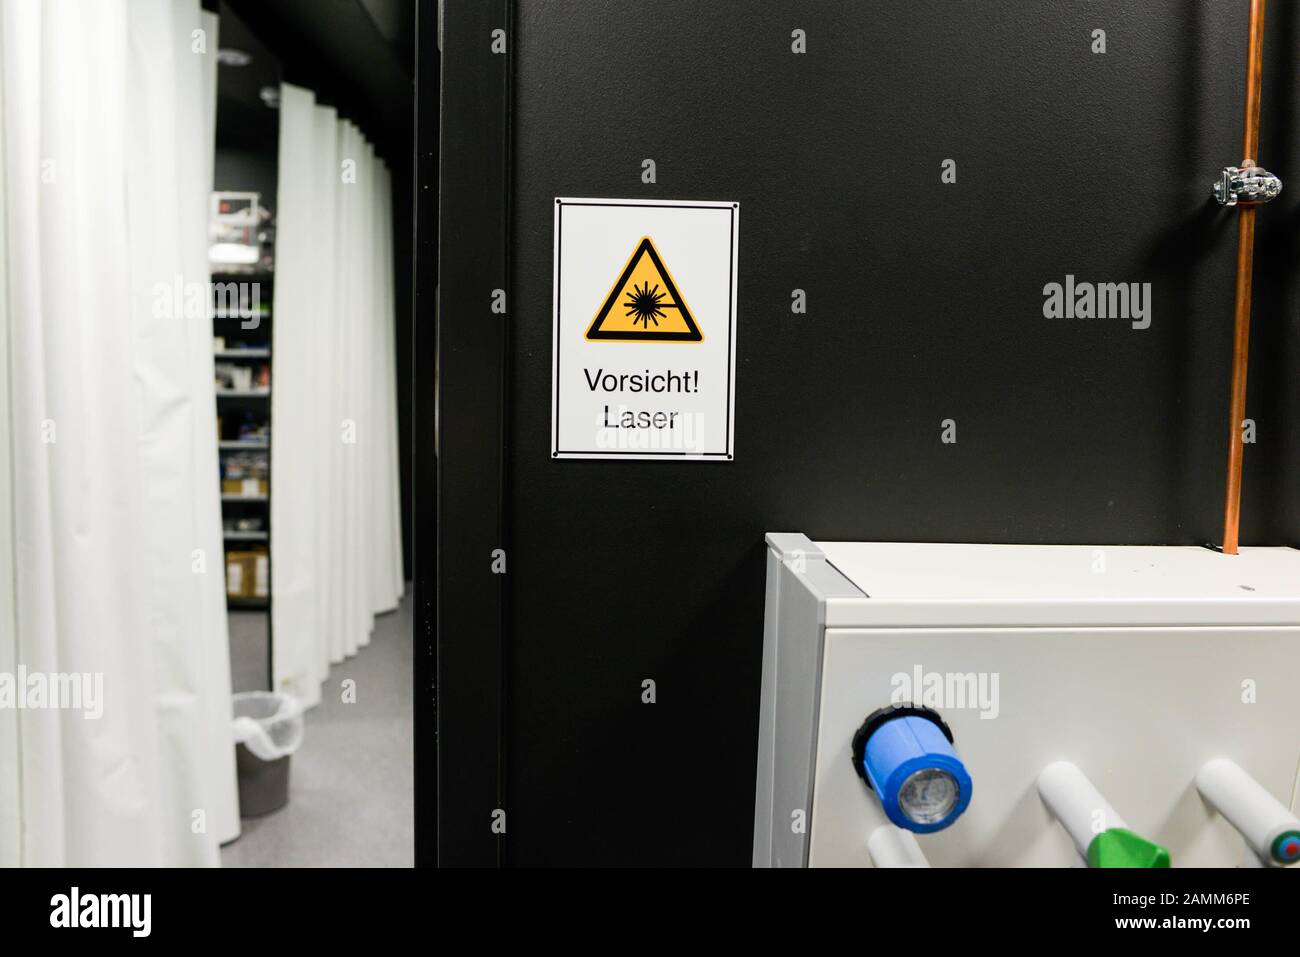 Laser Research High Resolution Stock Photography and Images - Alamy